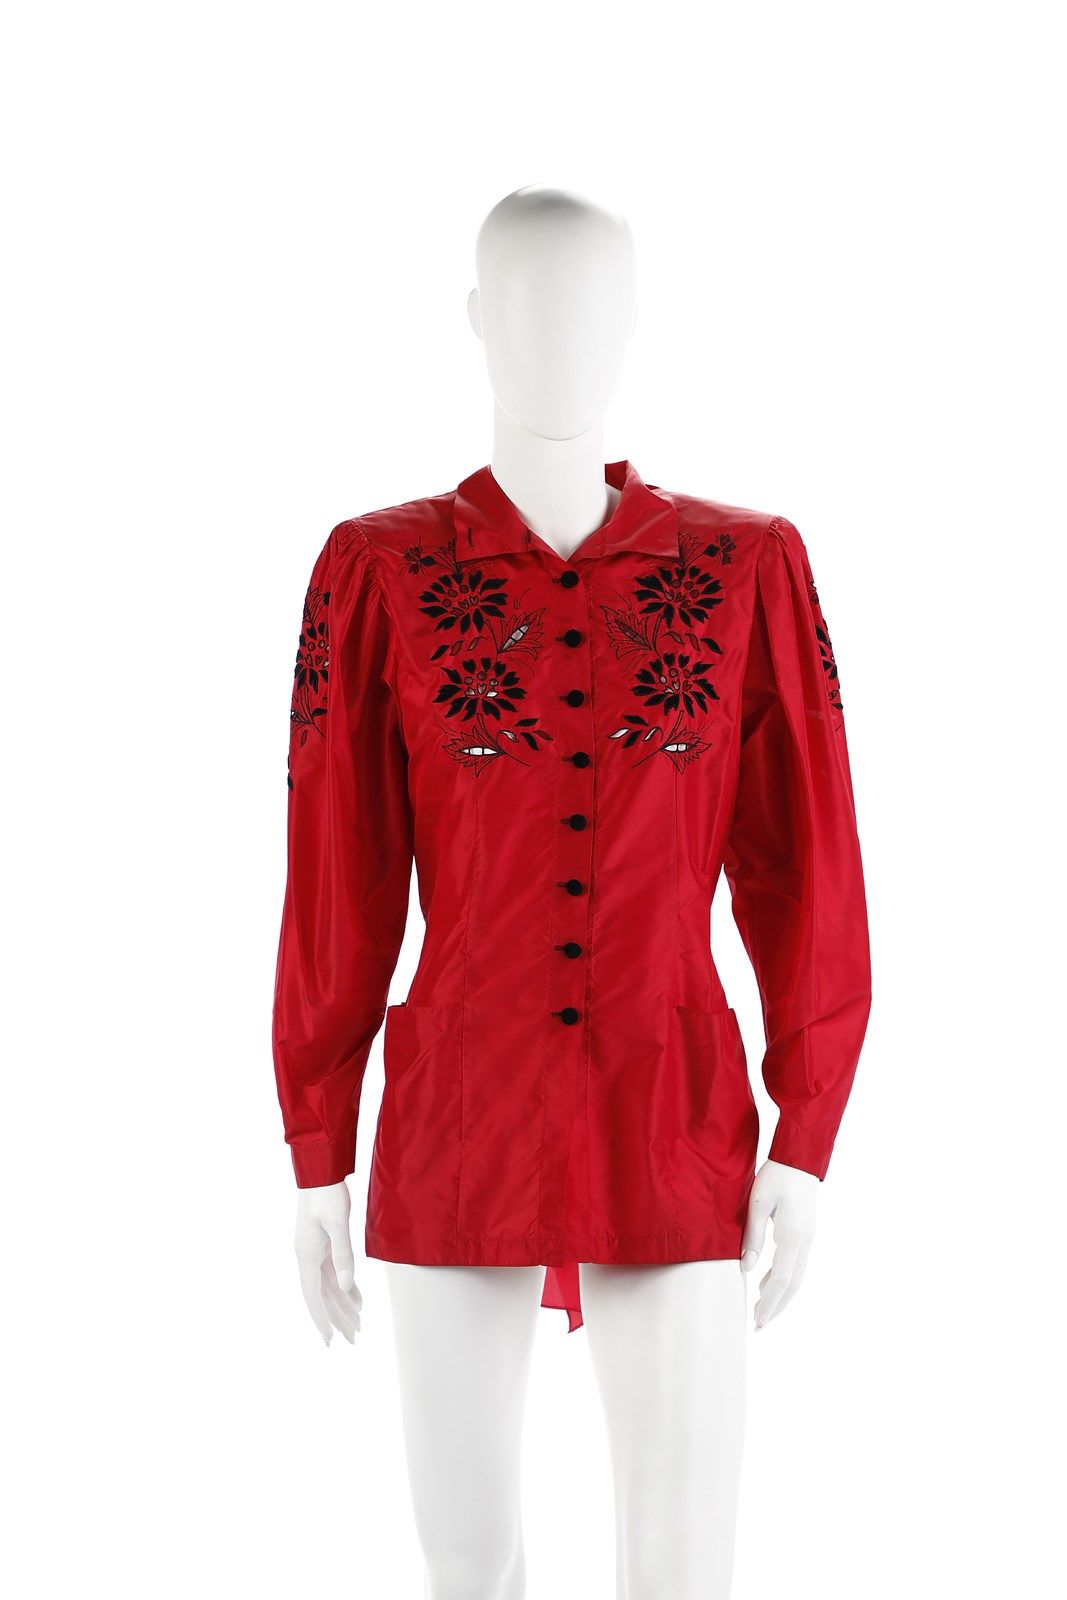 CINZIA BARAGNESI Red shirt with cutwork embroidery finished in black velvet, pad&hellip;